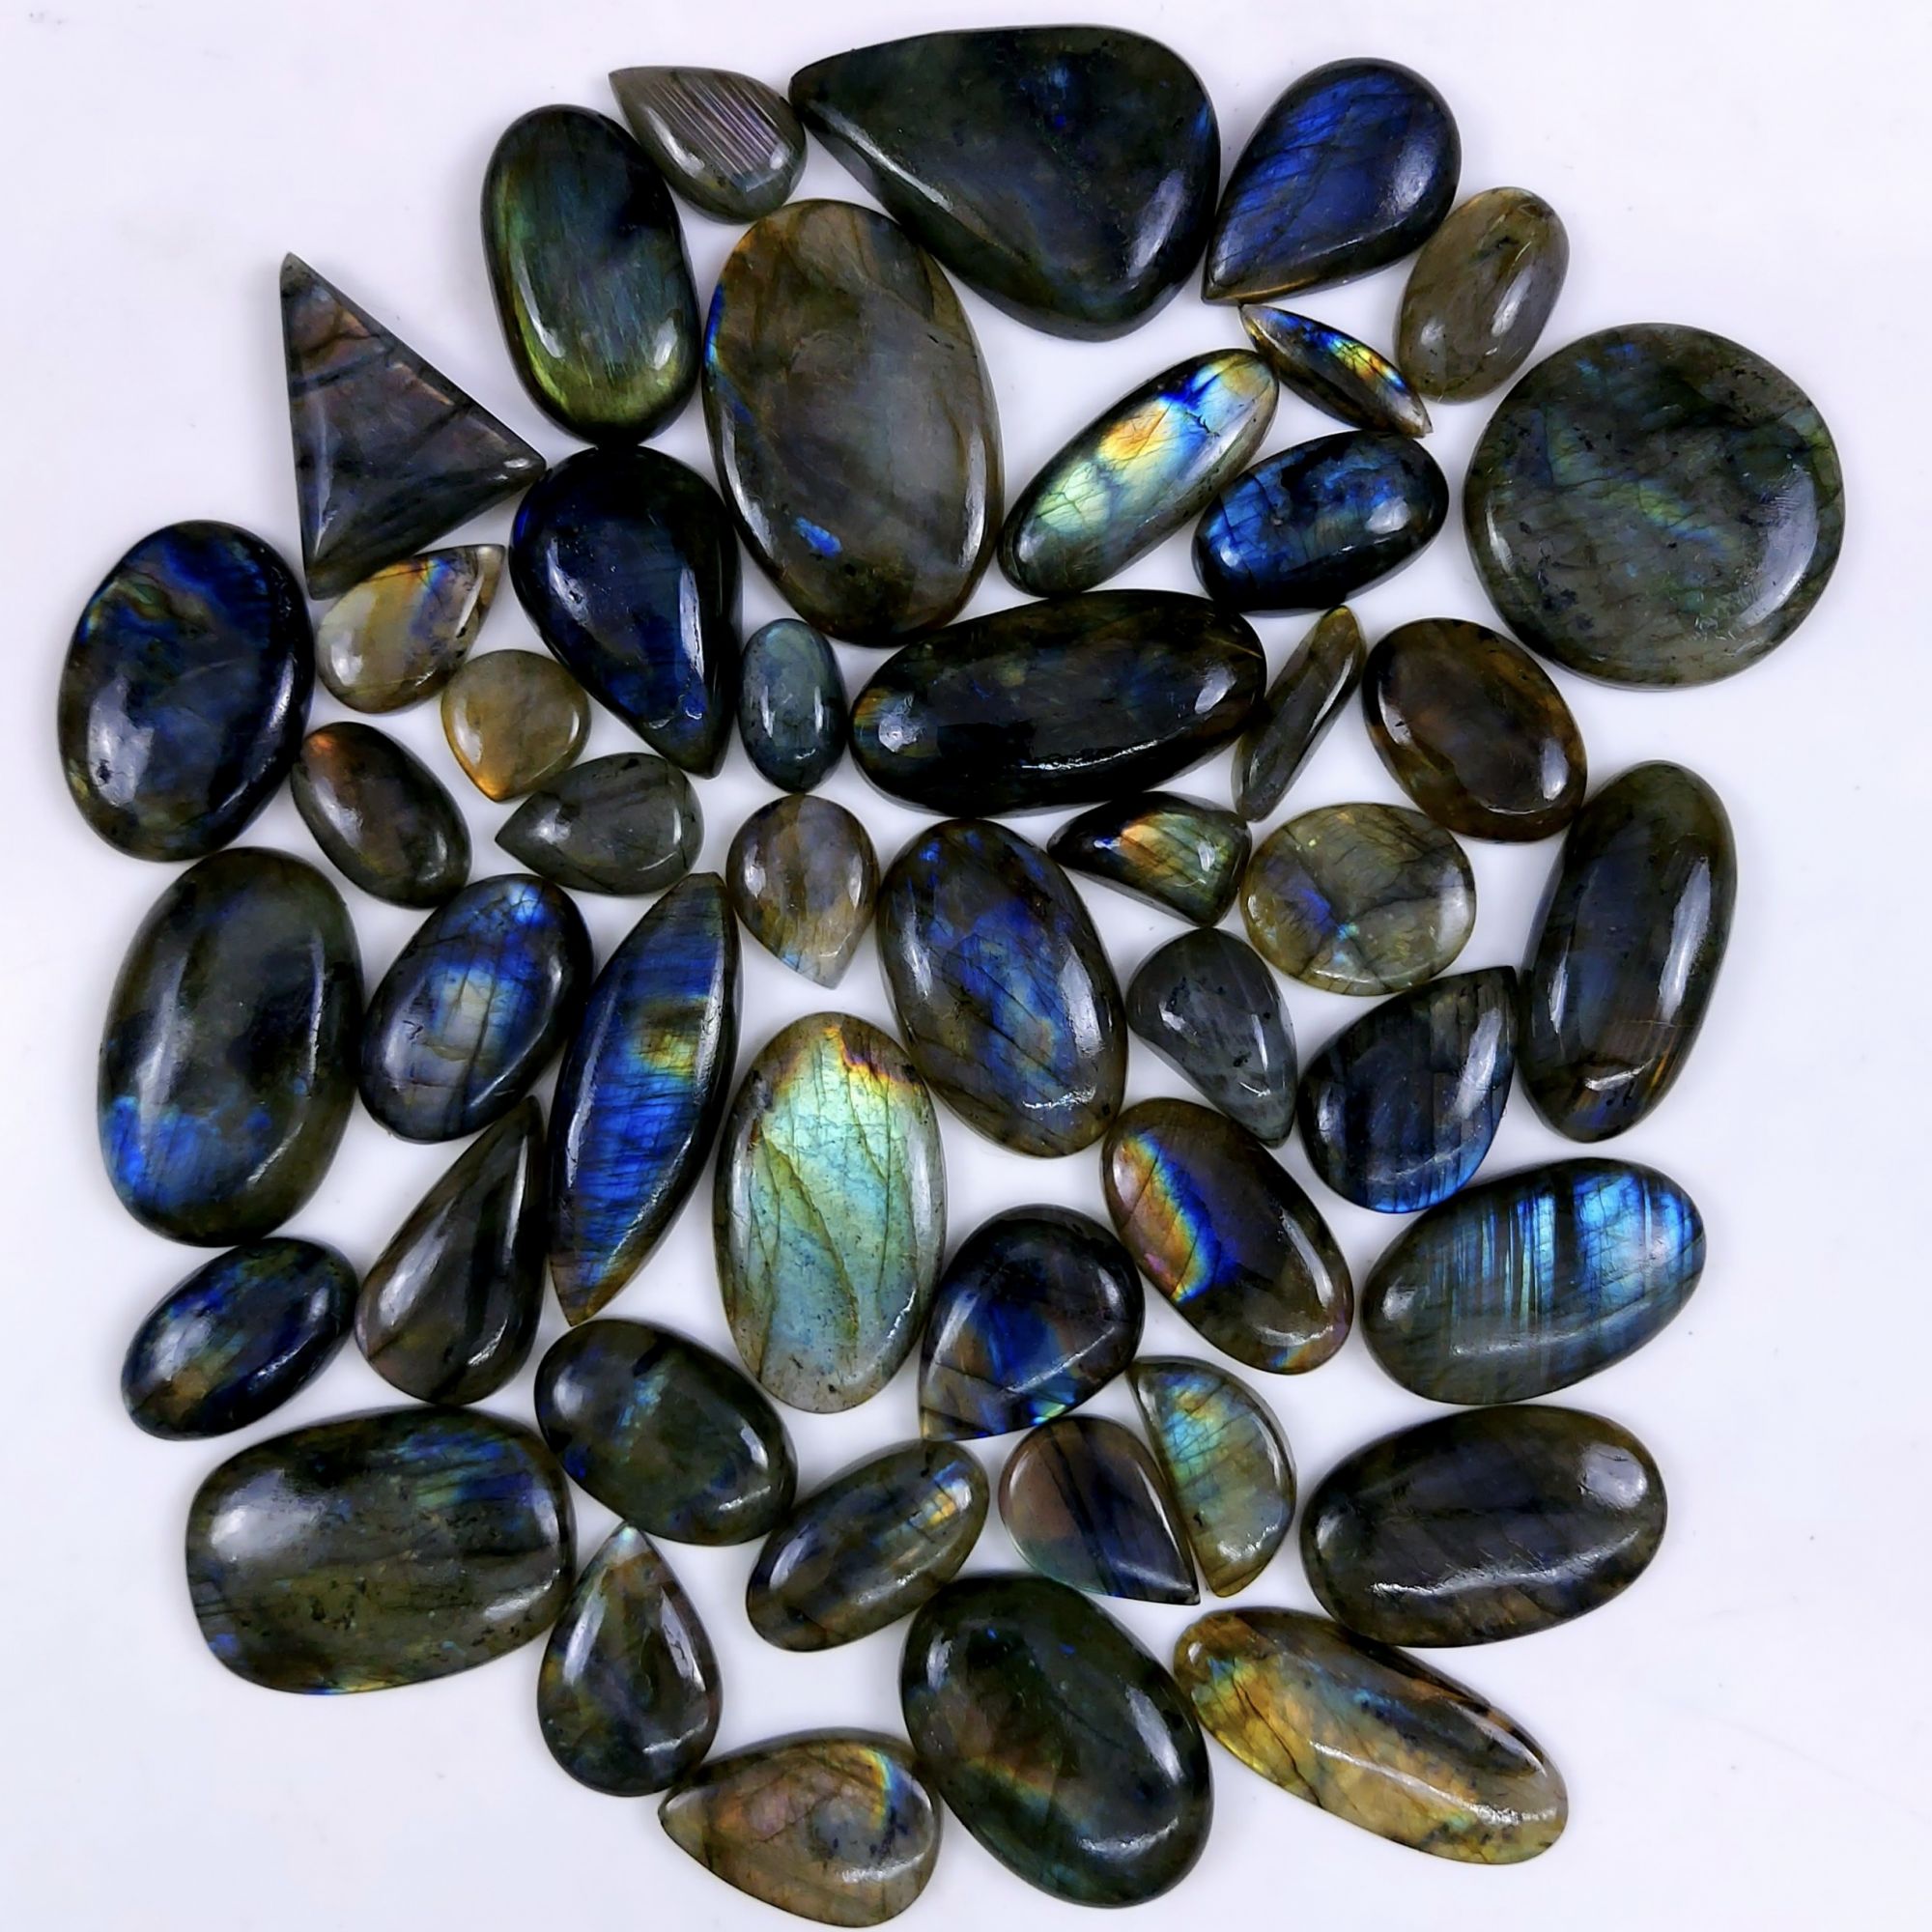 47pc 1614Cts Labradorite Cabochon Multifire Healing Crystal For Jewelry Supplies, Labradorite Necklace Handmade Wire Wrapped Gemstone Pendant 46x30 18x14mm#6355